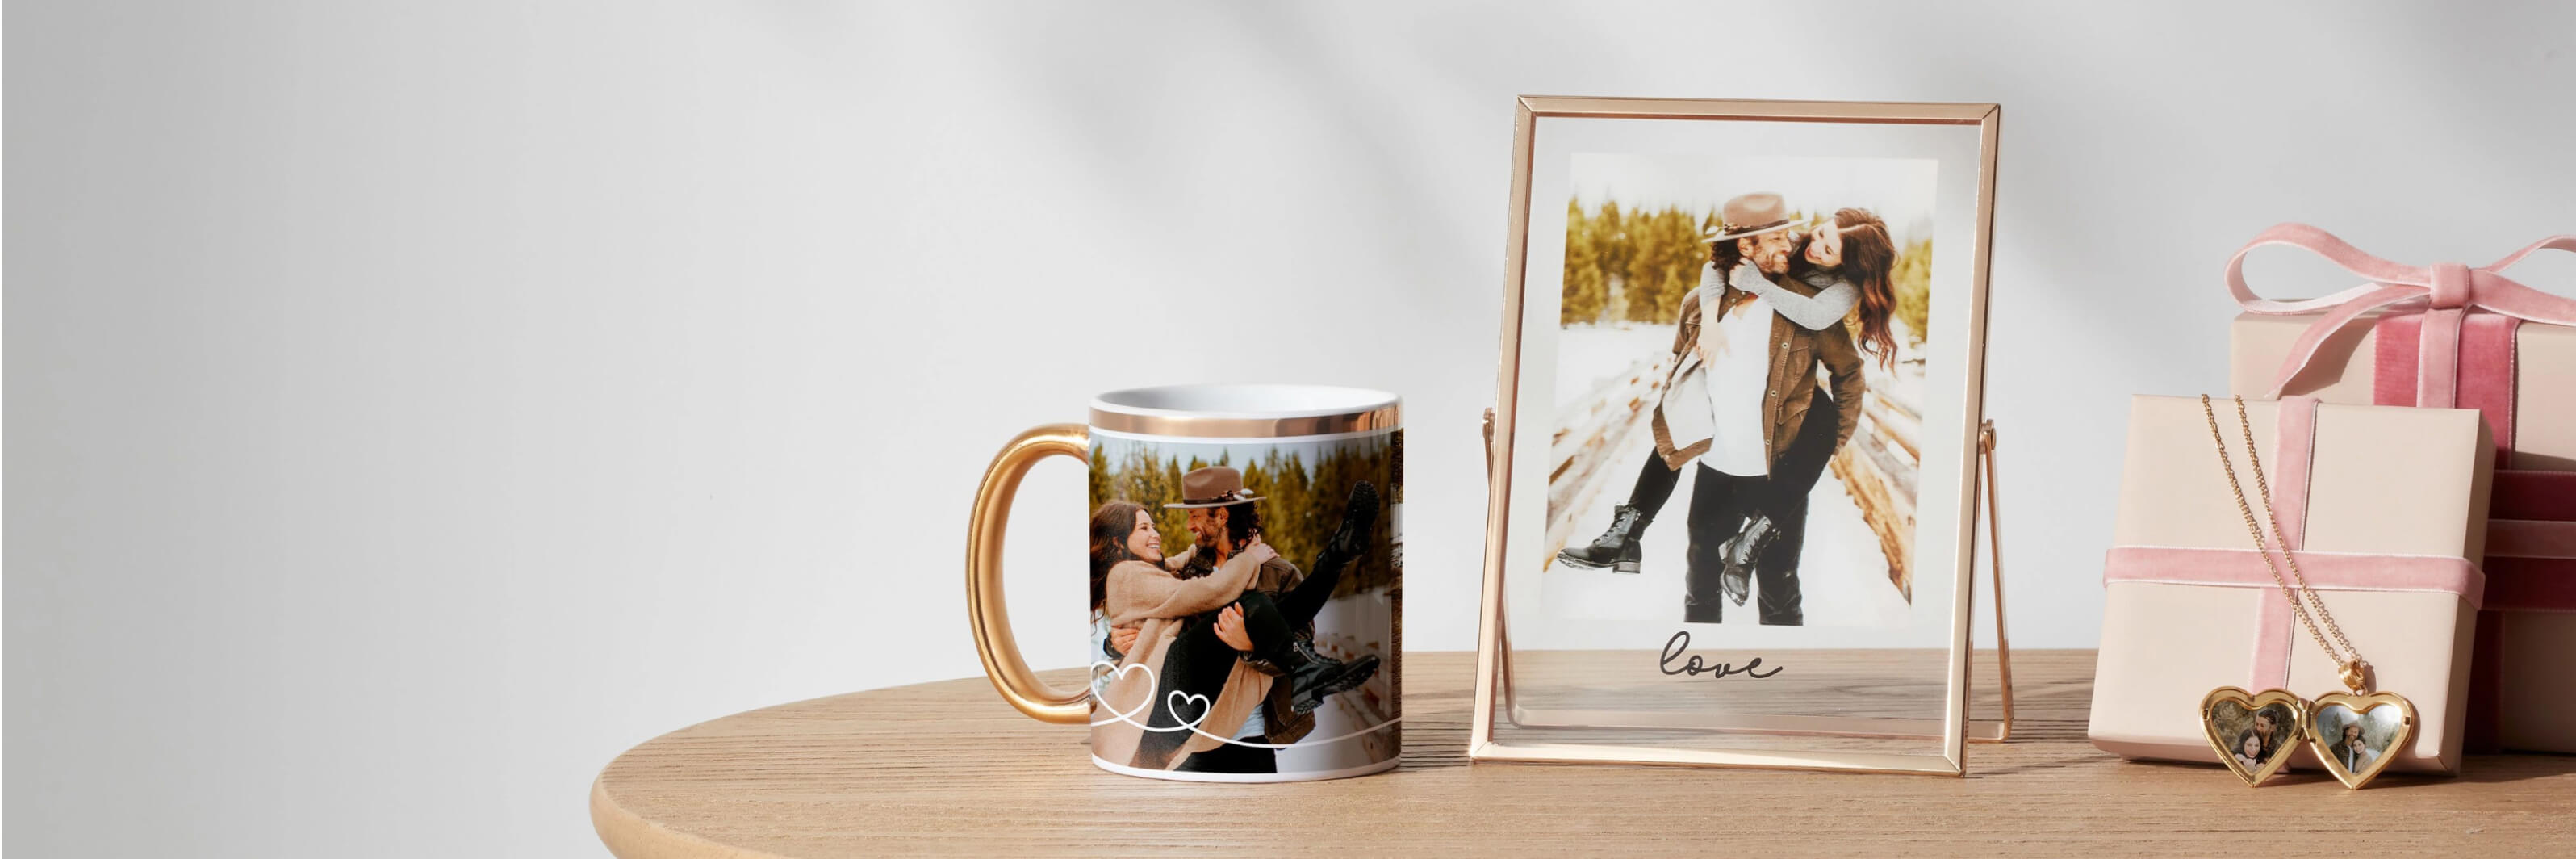 Engagement Gifts for Him,Birthday Gifts for Boyfriend Ideas,Valentines Gifts